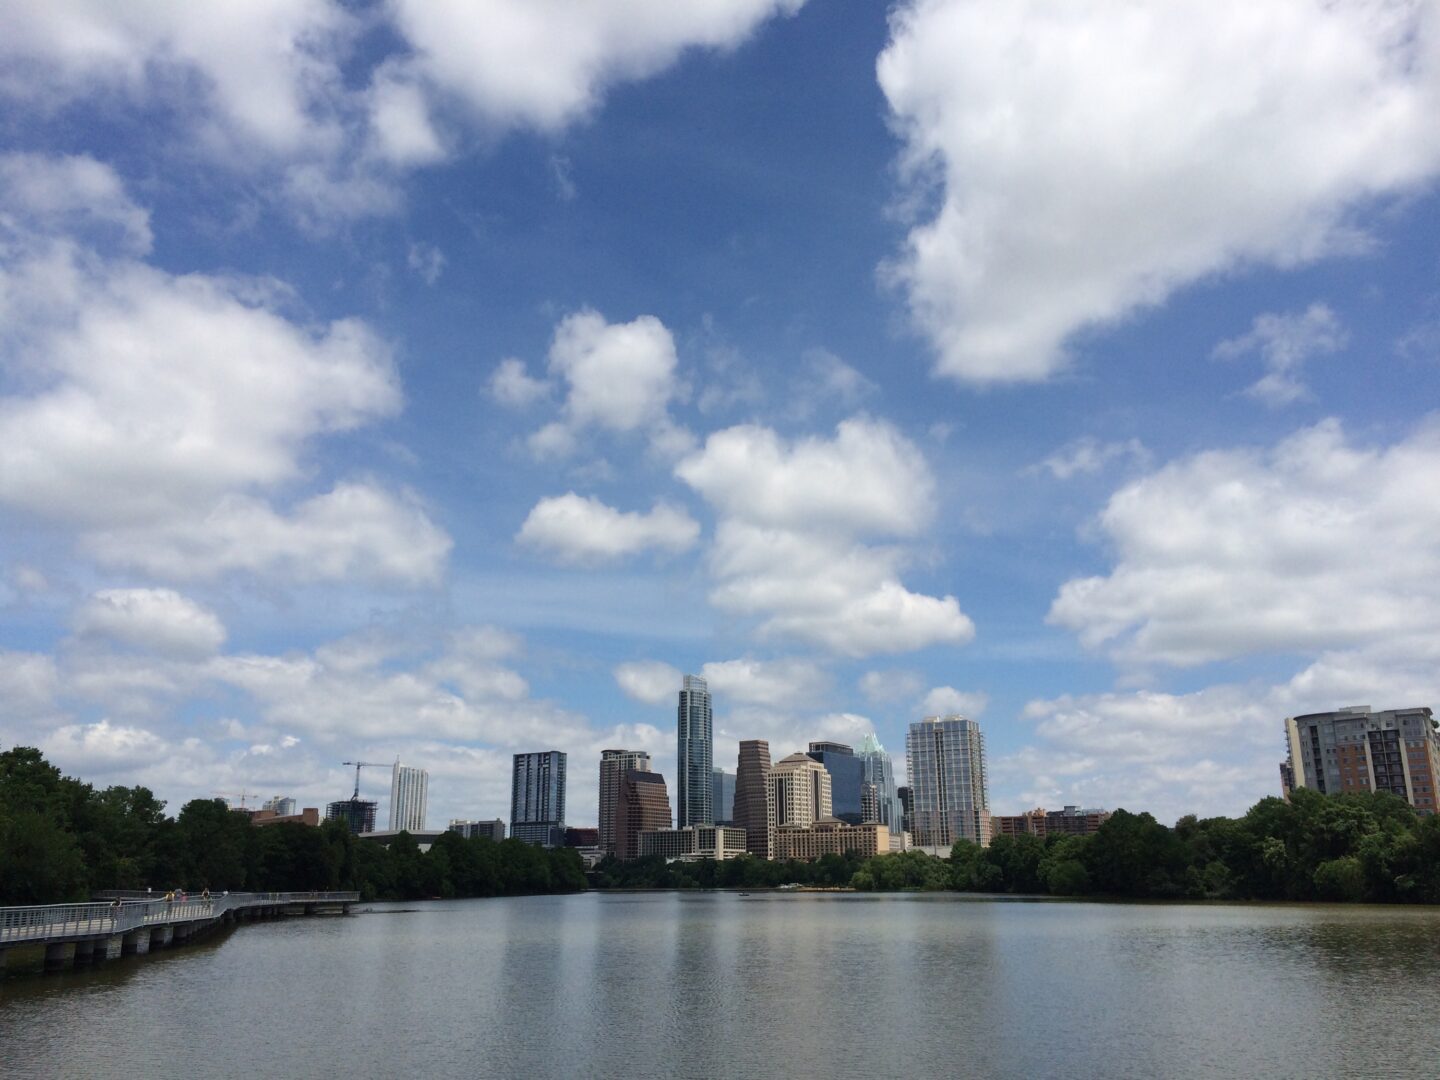 A lake with a city skyline in the background.